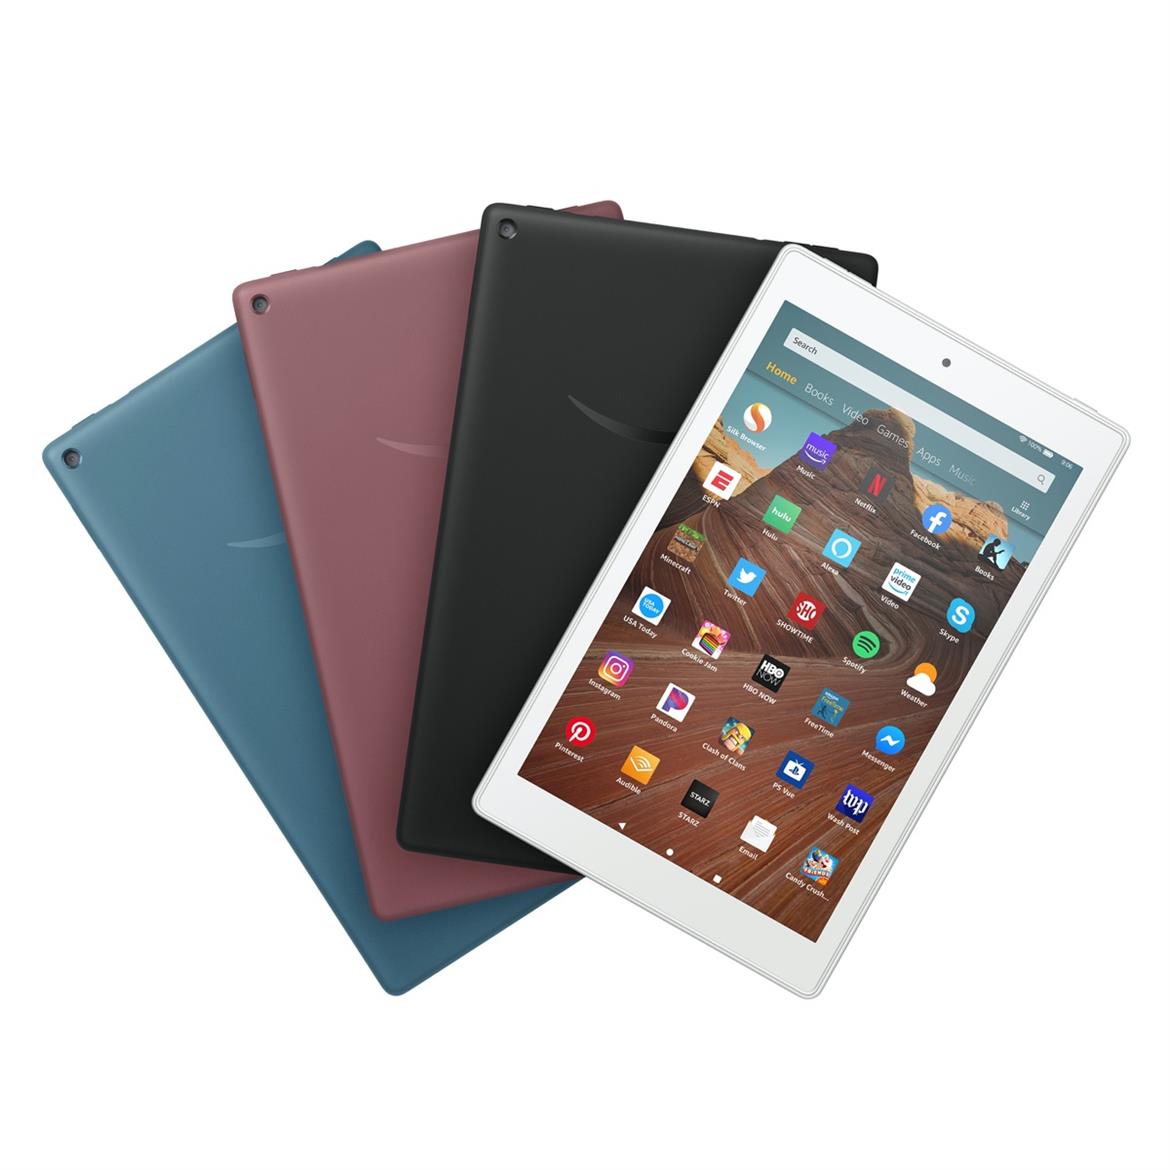 Amazon Launches New Fire HD 10 Tablet With USB-C, Faster CPU, Longer Battery Life